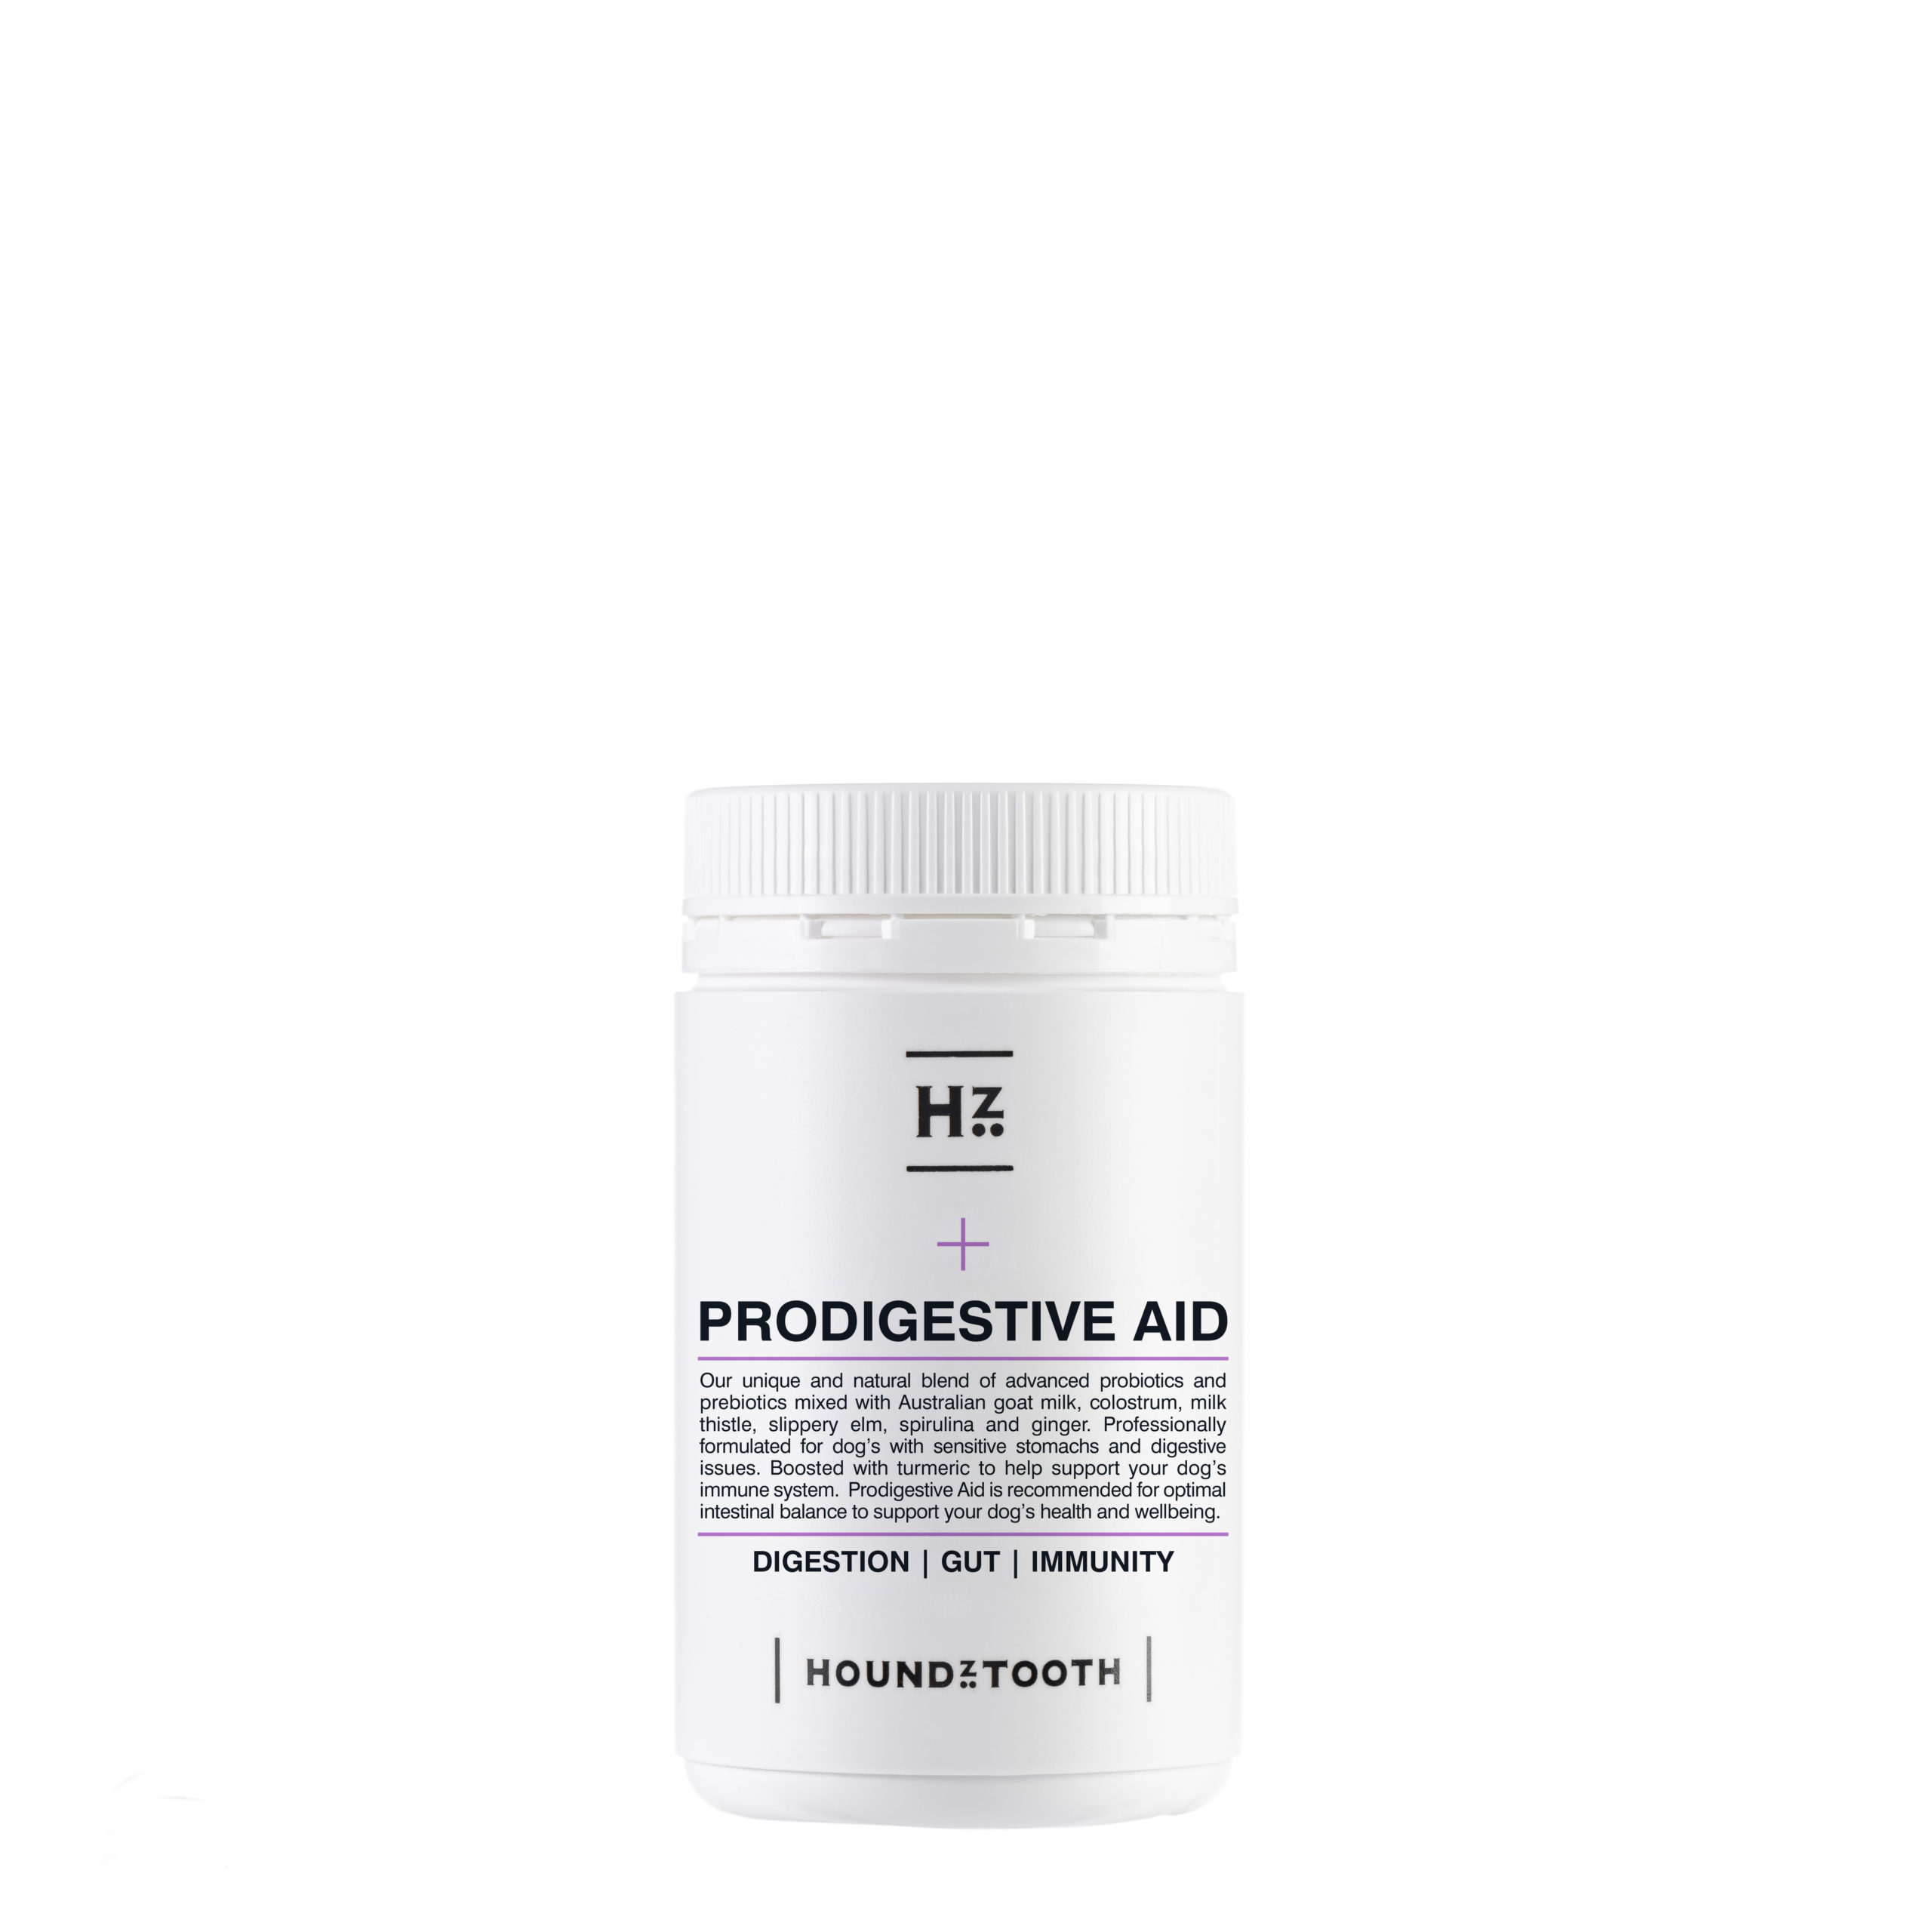 Product Review: Prodigestive Aid